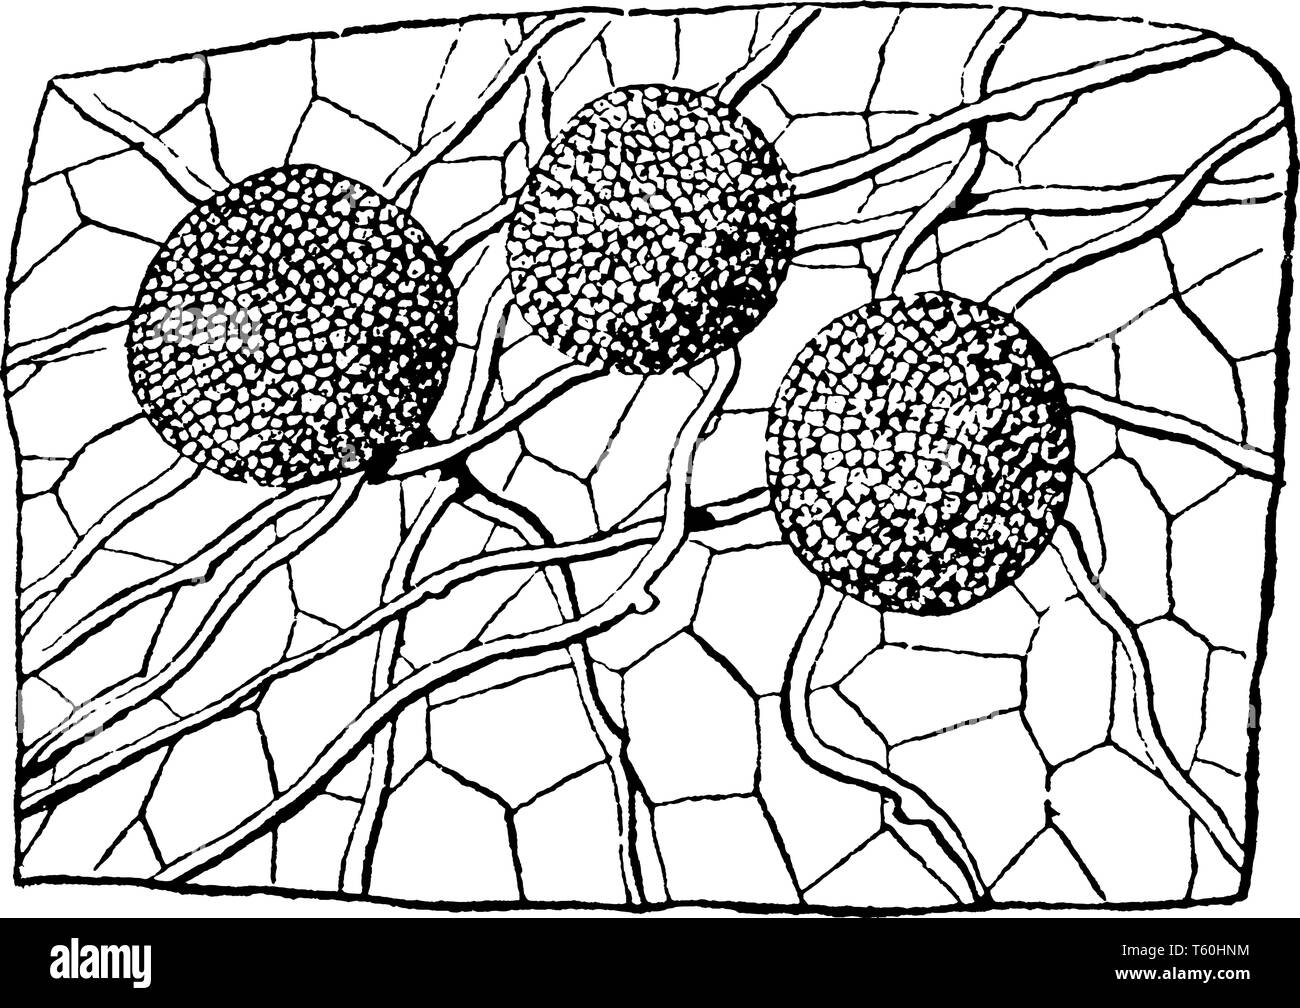 A picture showing the Erysiphe Communis, powdery mildew, that is on the epidermis of the leaf of the flower, Indian beet, vintage line drawing or engr Stock Vector